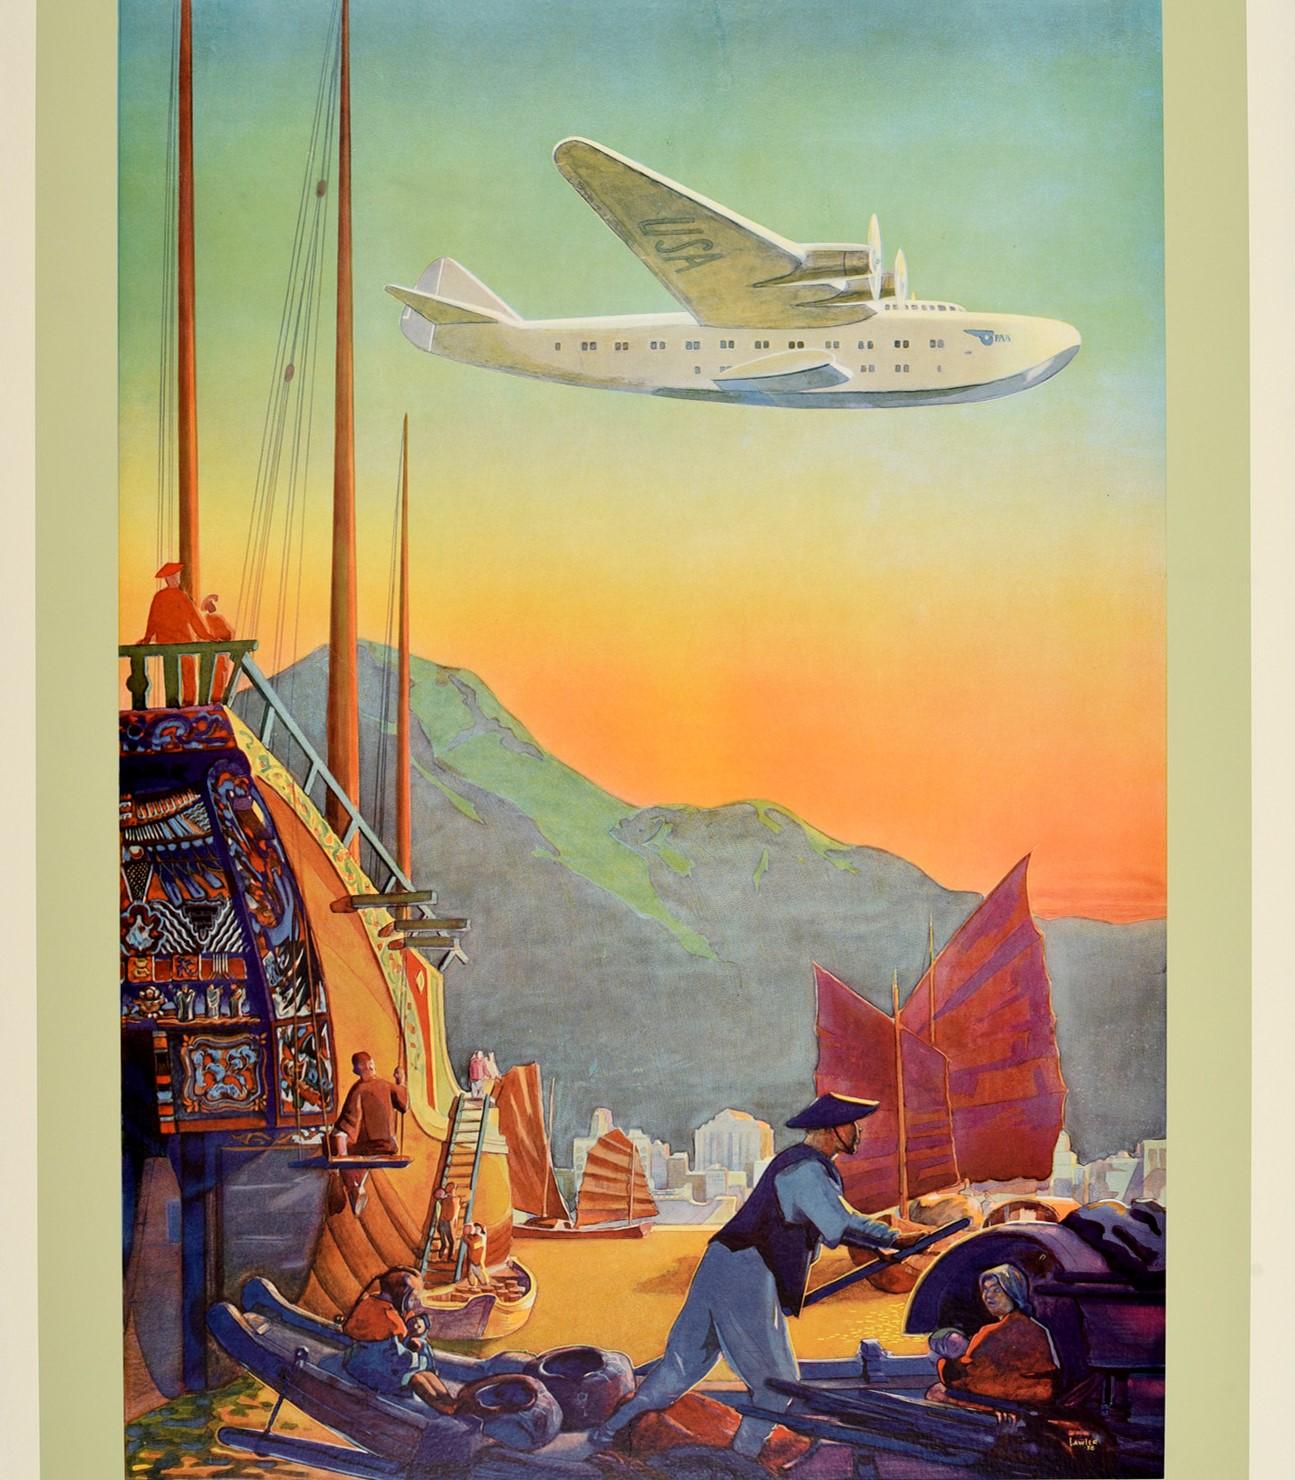 Original vintage PanAm travel poster featuring a great image depicting a seaplane marked USA flying over Hong Kong harbour with traditional junk boats in the foreground and the city buildings below the Peak hills of Hong Kong island across the water